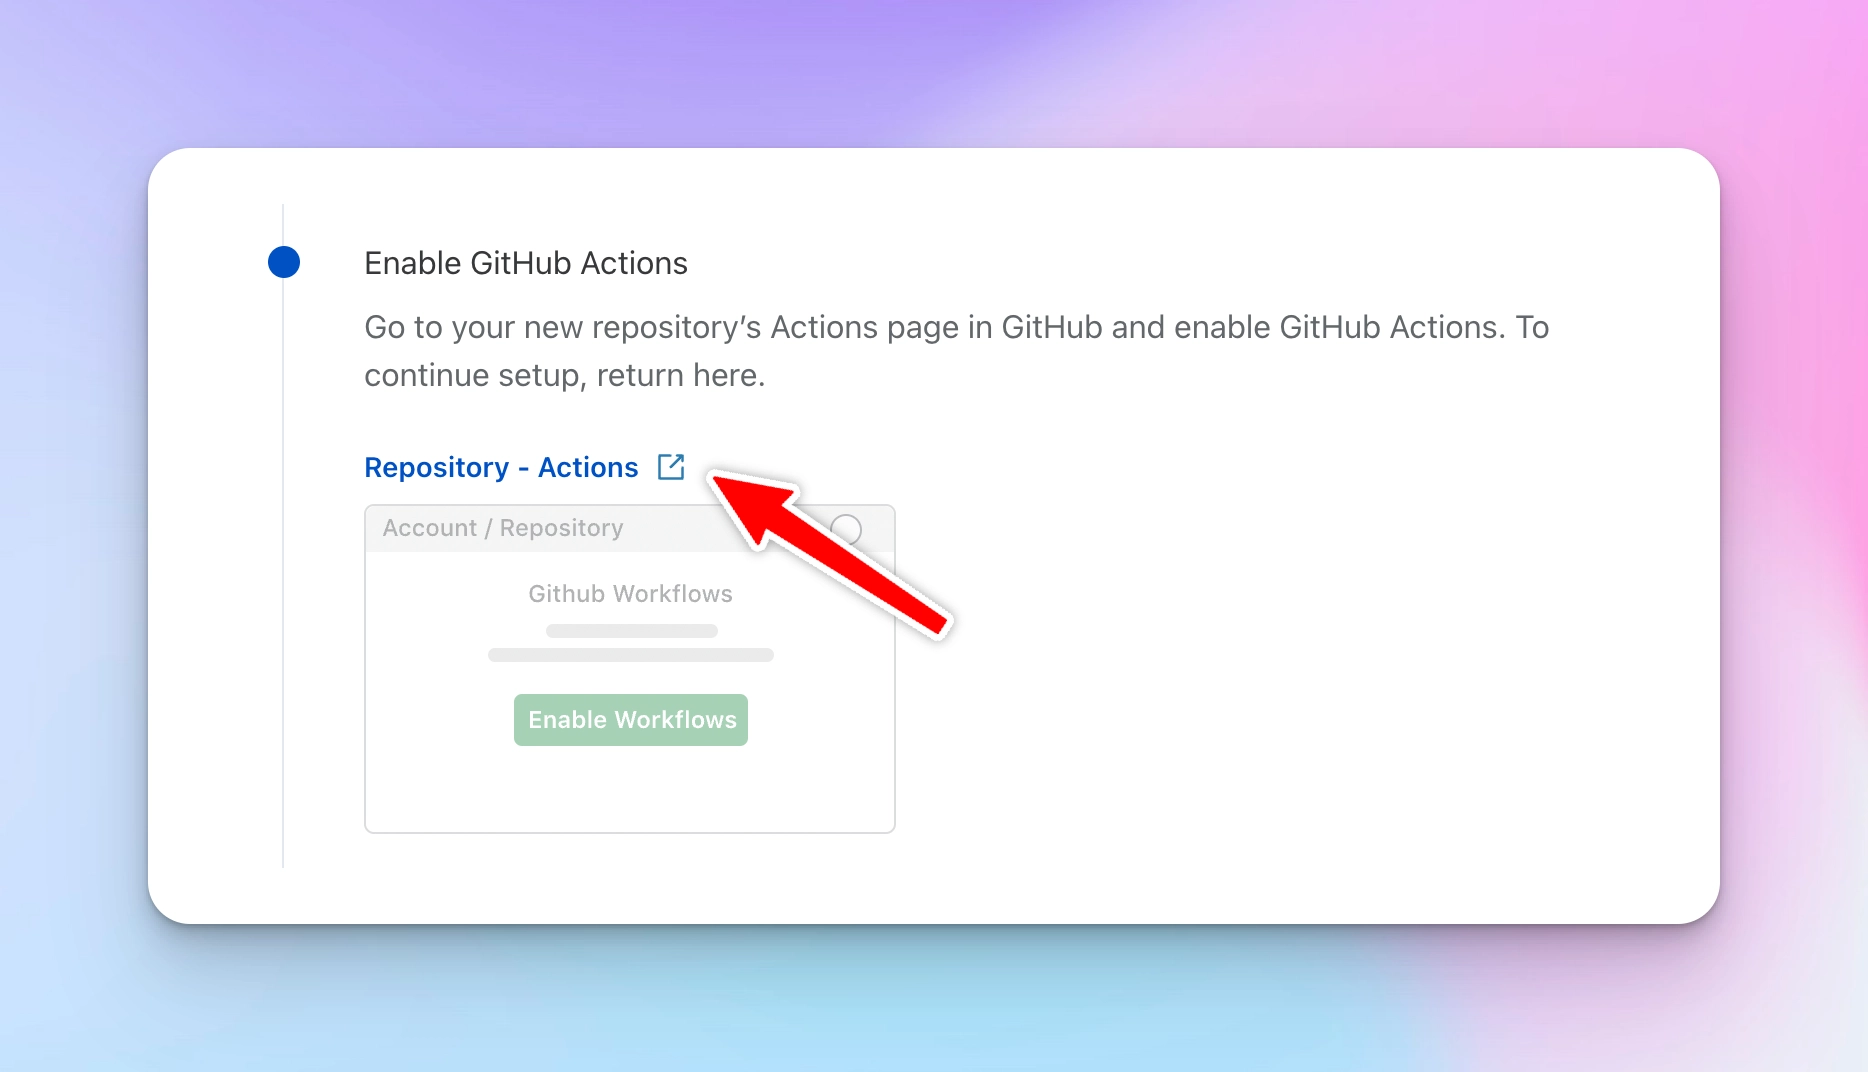 Go to github actions page